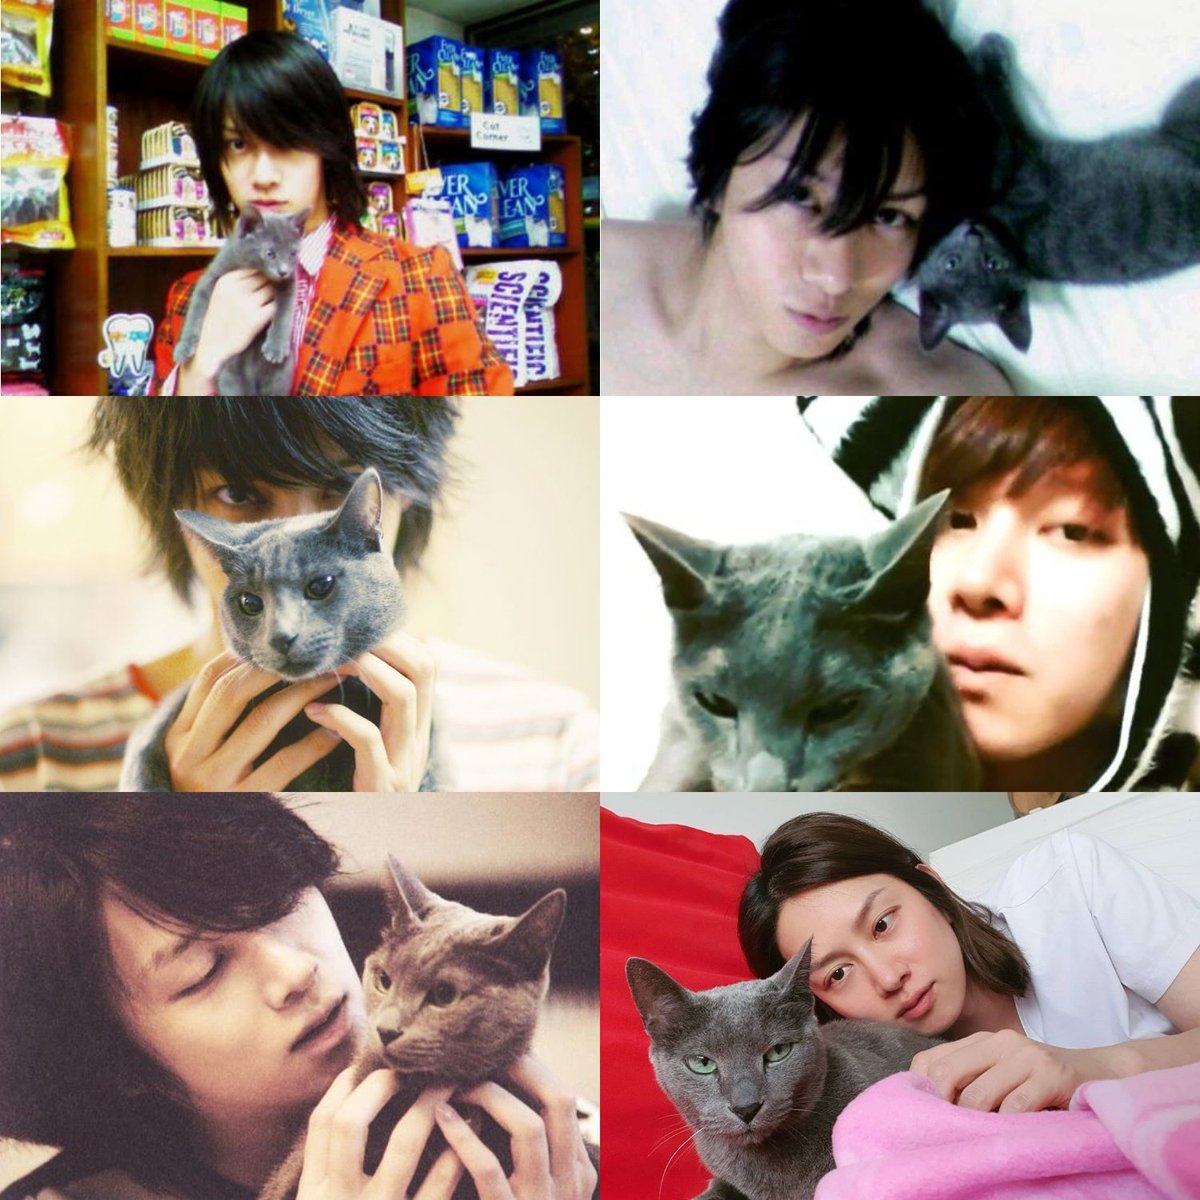 heechul’s cat hanje heebum turns 18! 🥺 thank you for staying by heechul’s side for the past 18 years. always be healthy + live long with gibok & heenim 🤍